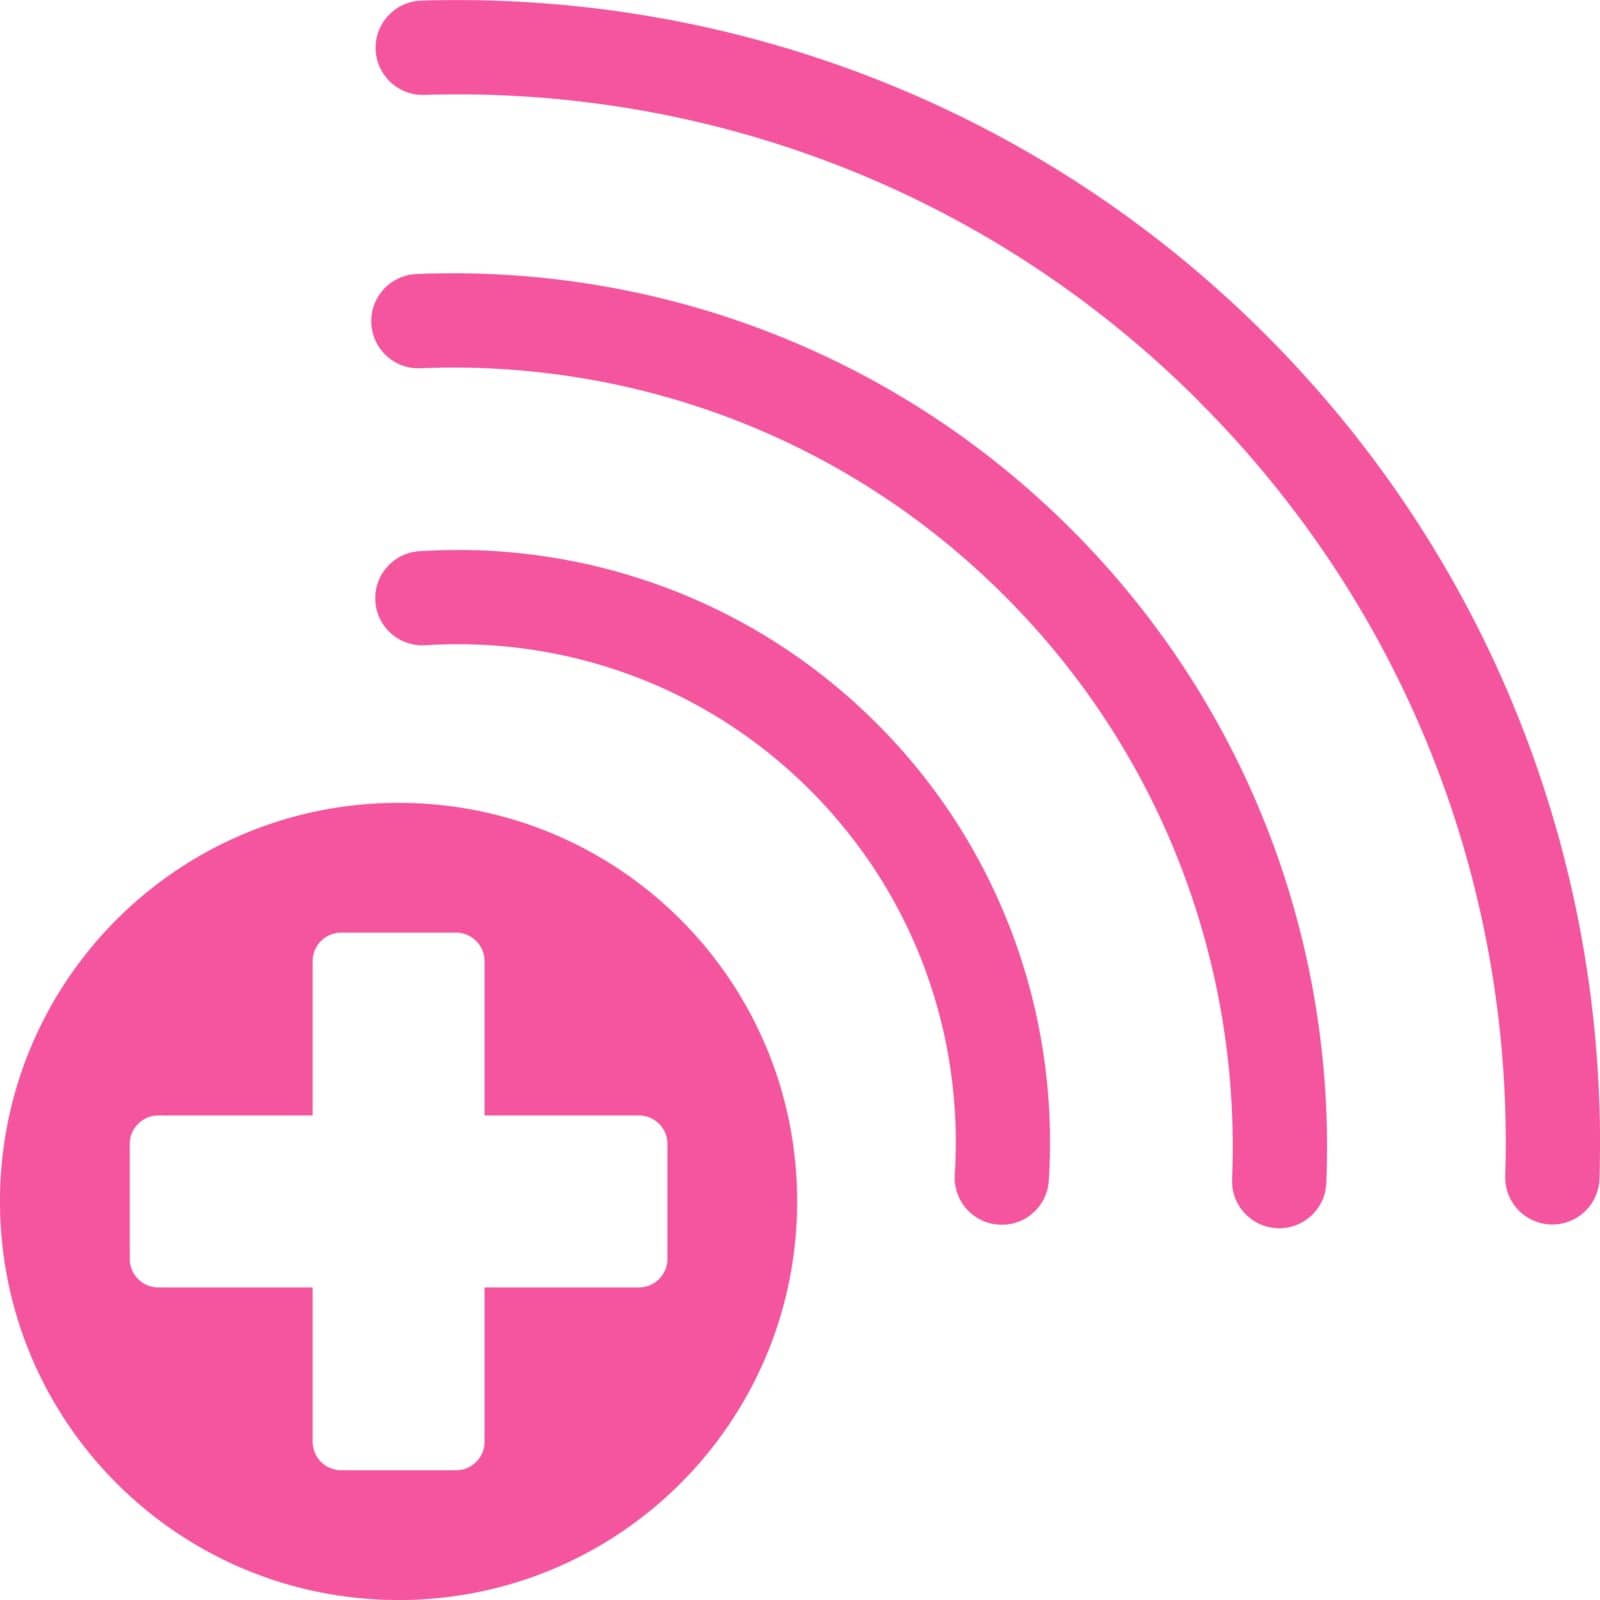 Medical Source vector icon. Style is flat symbol, pink color, rounded angles, white background.